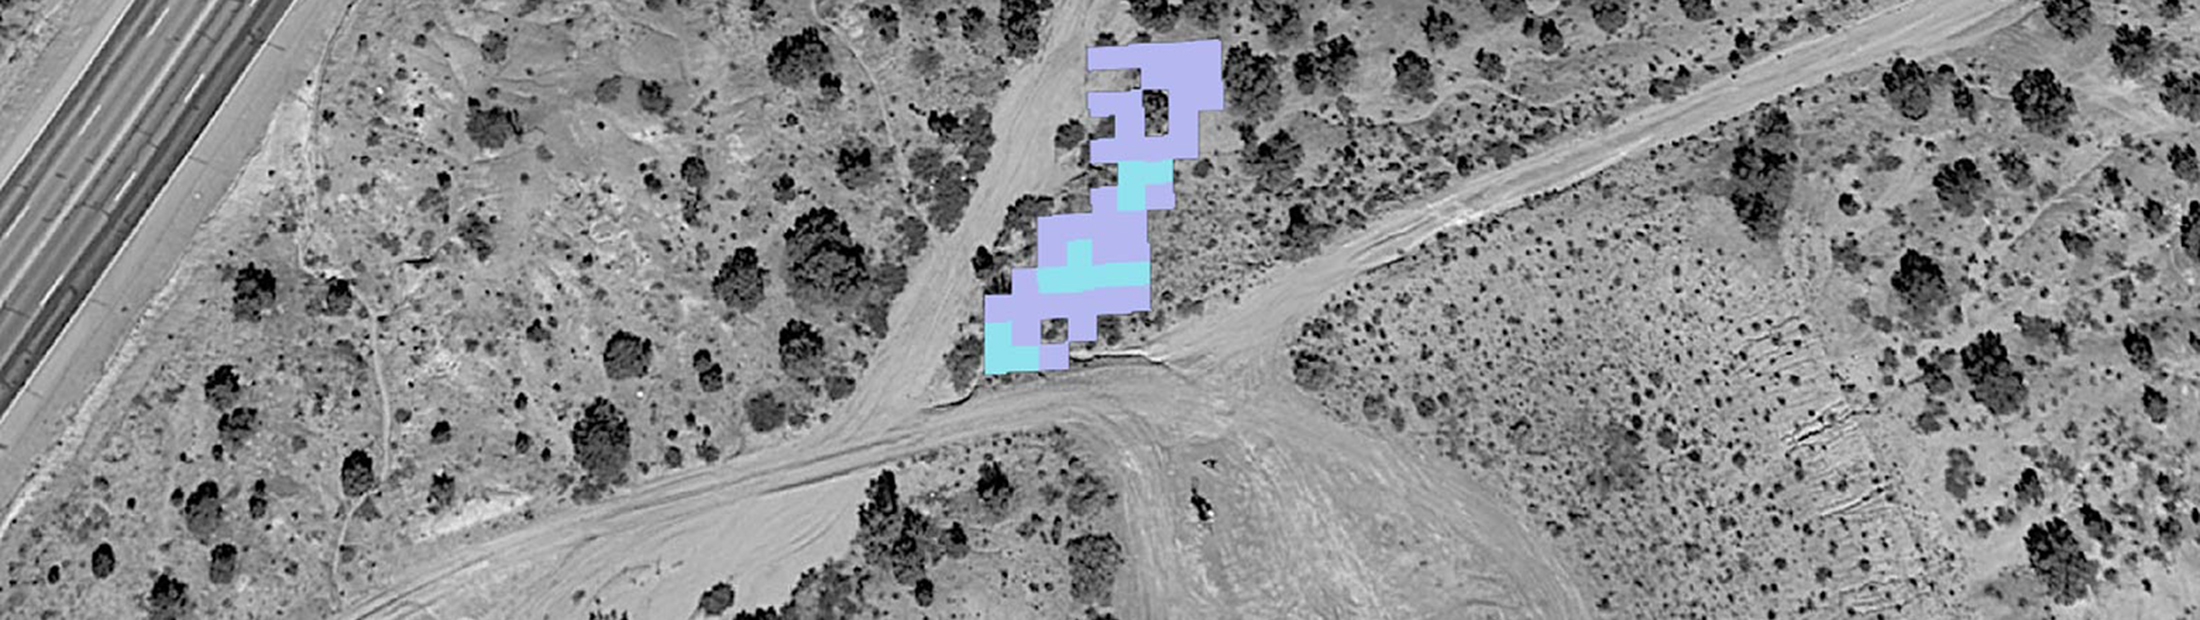 An aerial view of the ground in grayscale and a pixelated purple and blue area in the center.